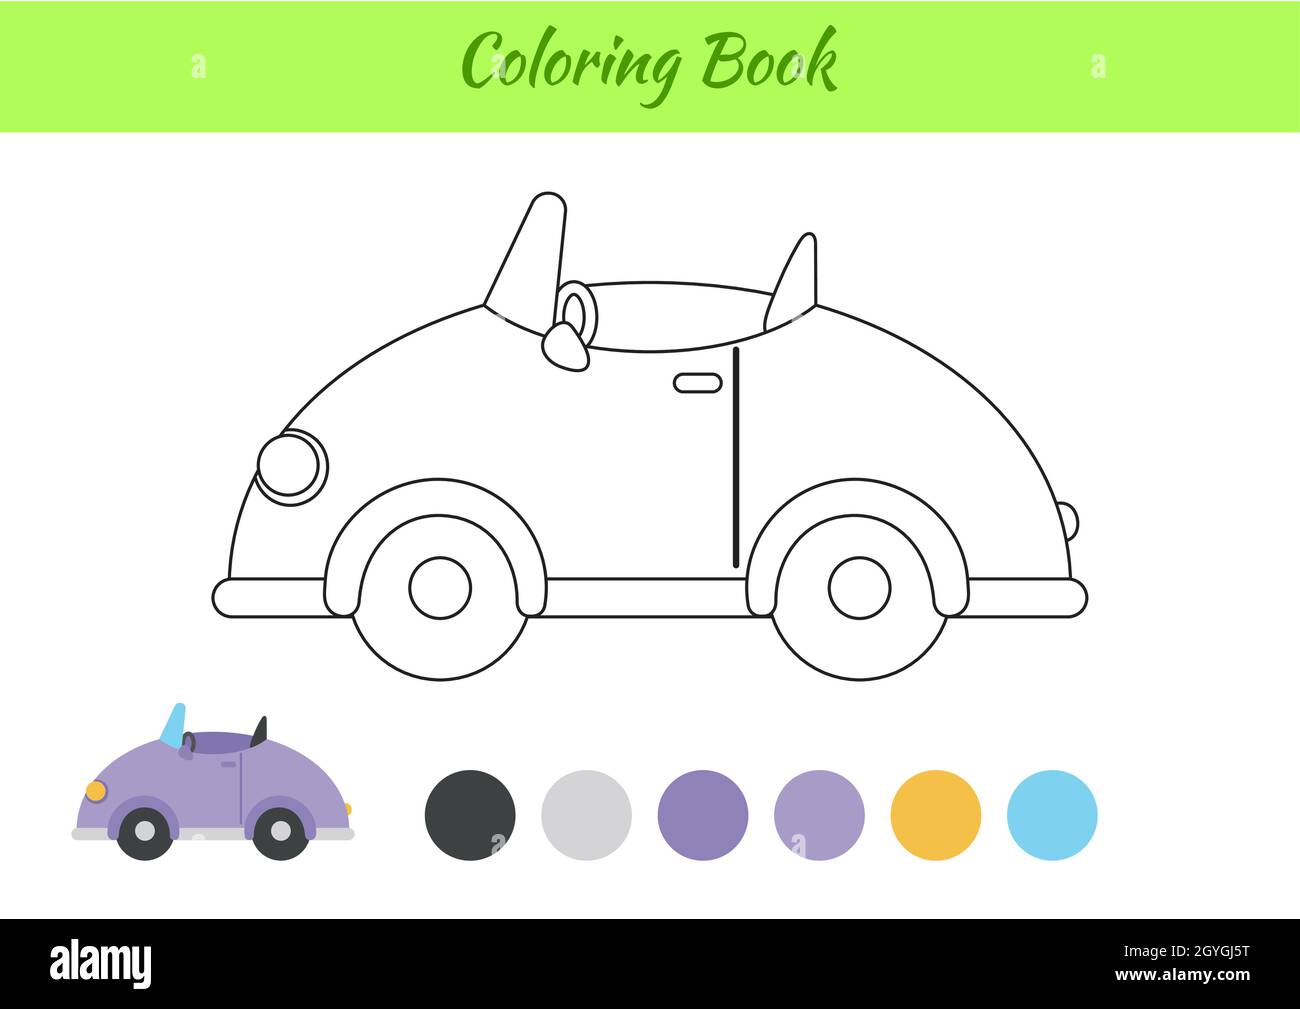 Coloring book car for children educational activity page for preschool years kids and toddlers with transport printable worksheet cartoon colorful stock vector image art